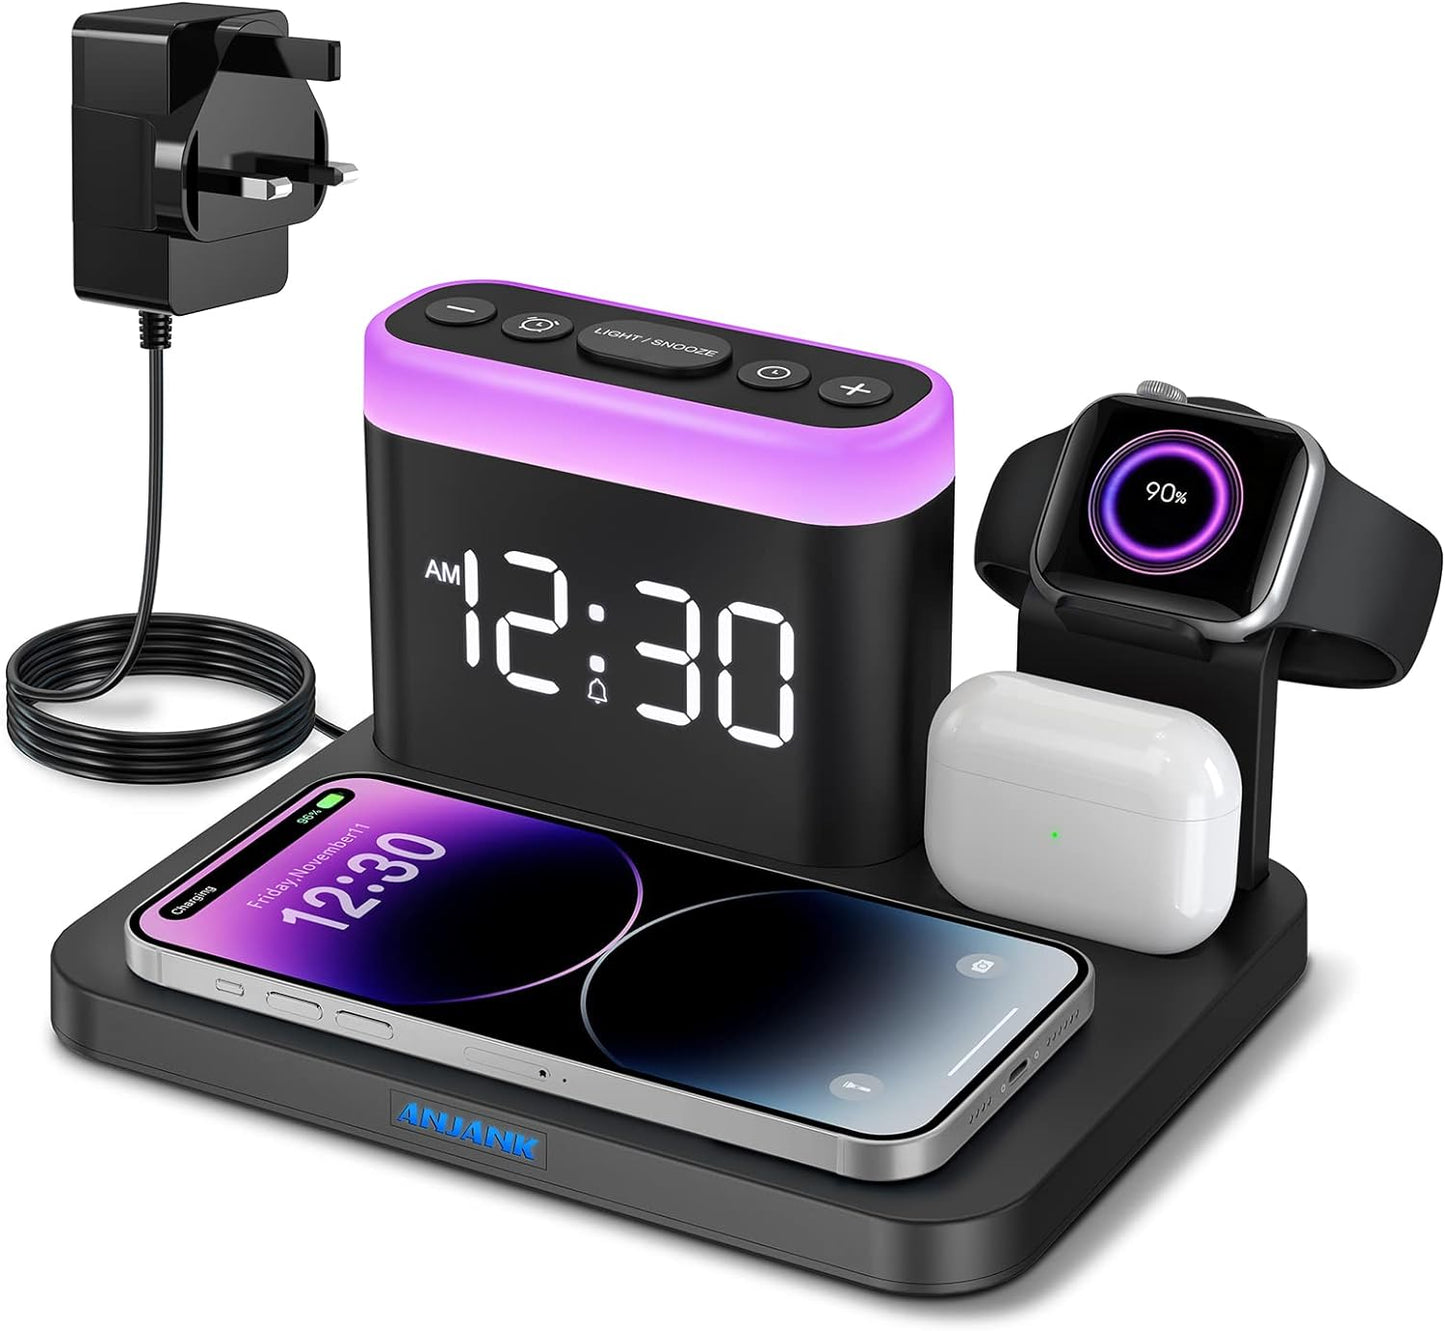 Wireless Charging Station-5 in 1 Wireless Charger Stand with Alarm Clock, 7 Night Lights, Charging Dock for Iphone 15/14/13/12/11/Pro/Max/Xr/Xs/Samsung Phone, Apple Watch 8/7/6/5/SE, Airpods Pro/3/2/1